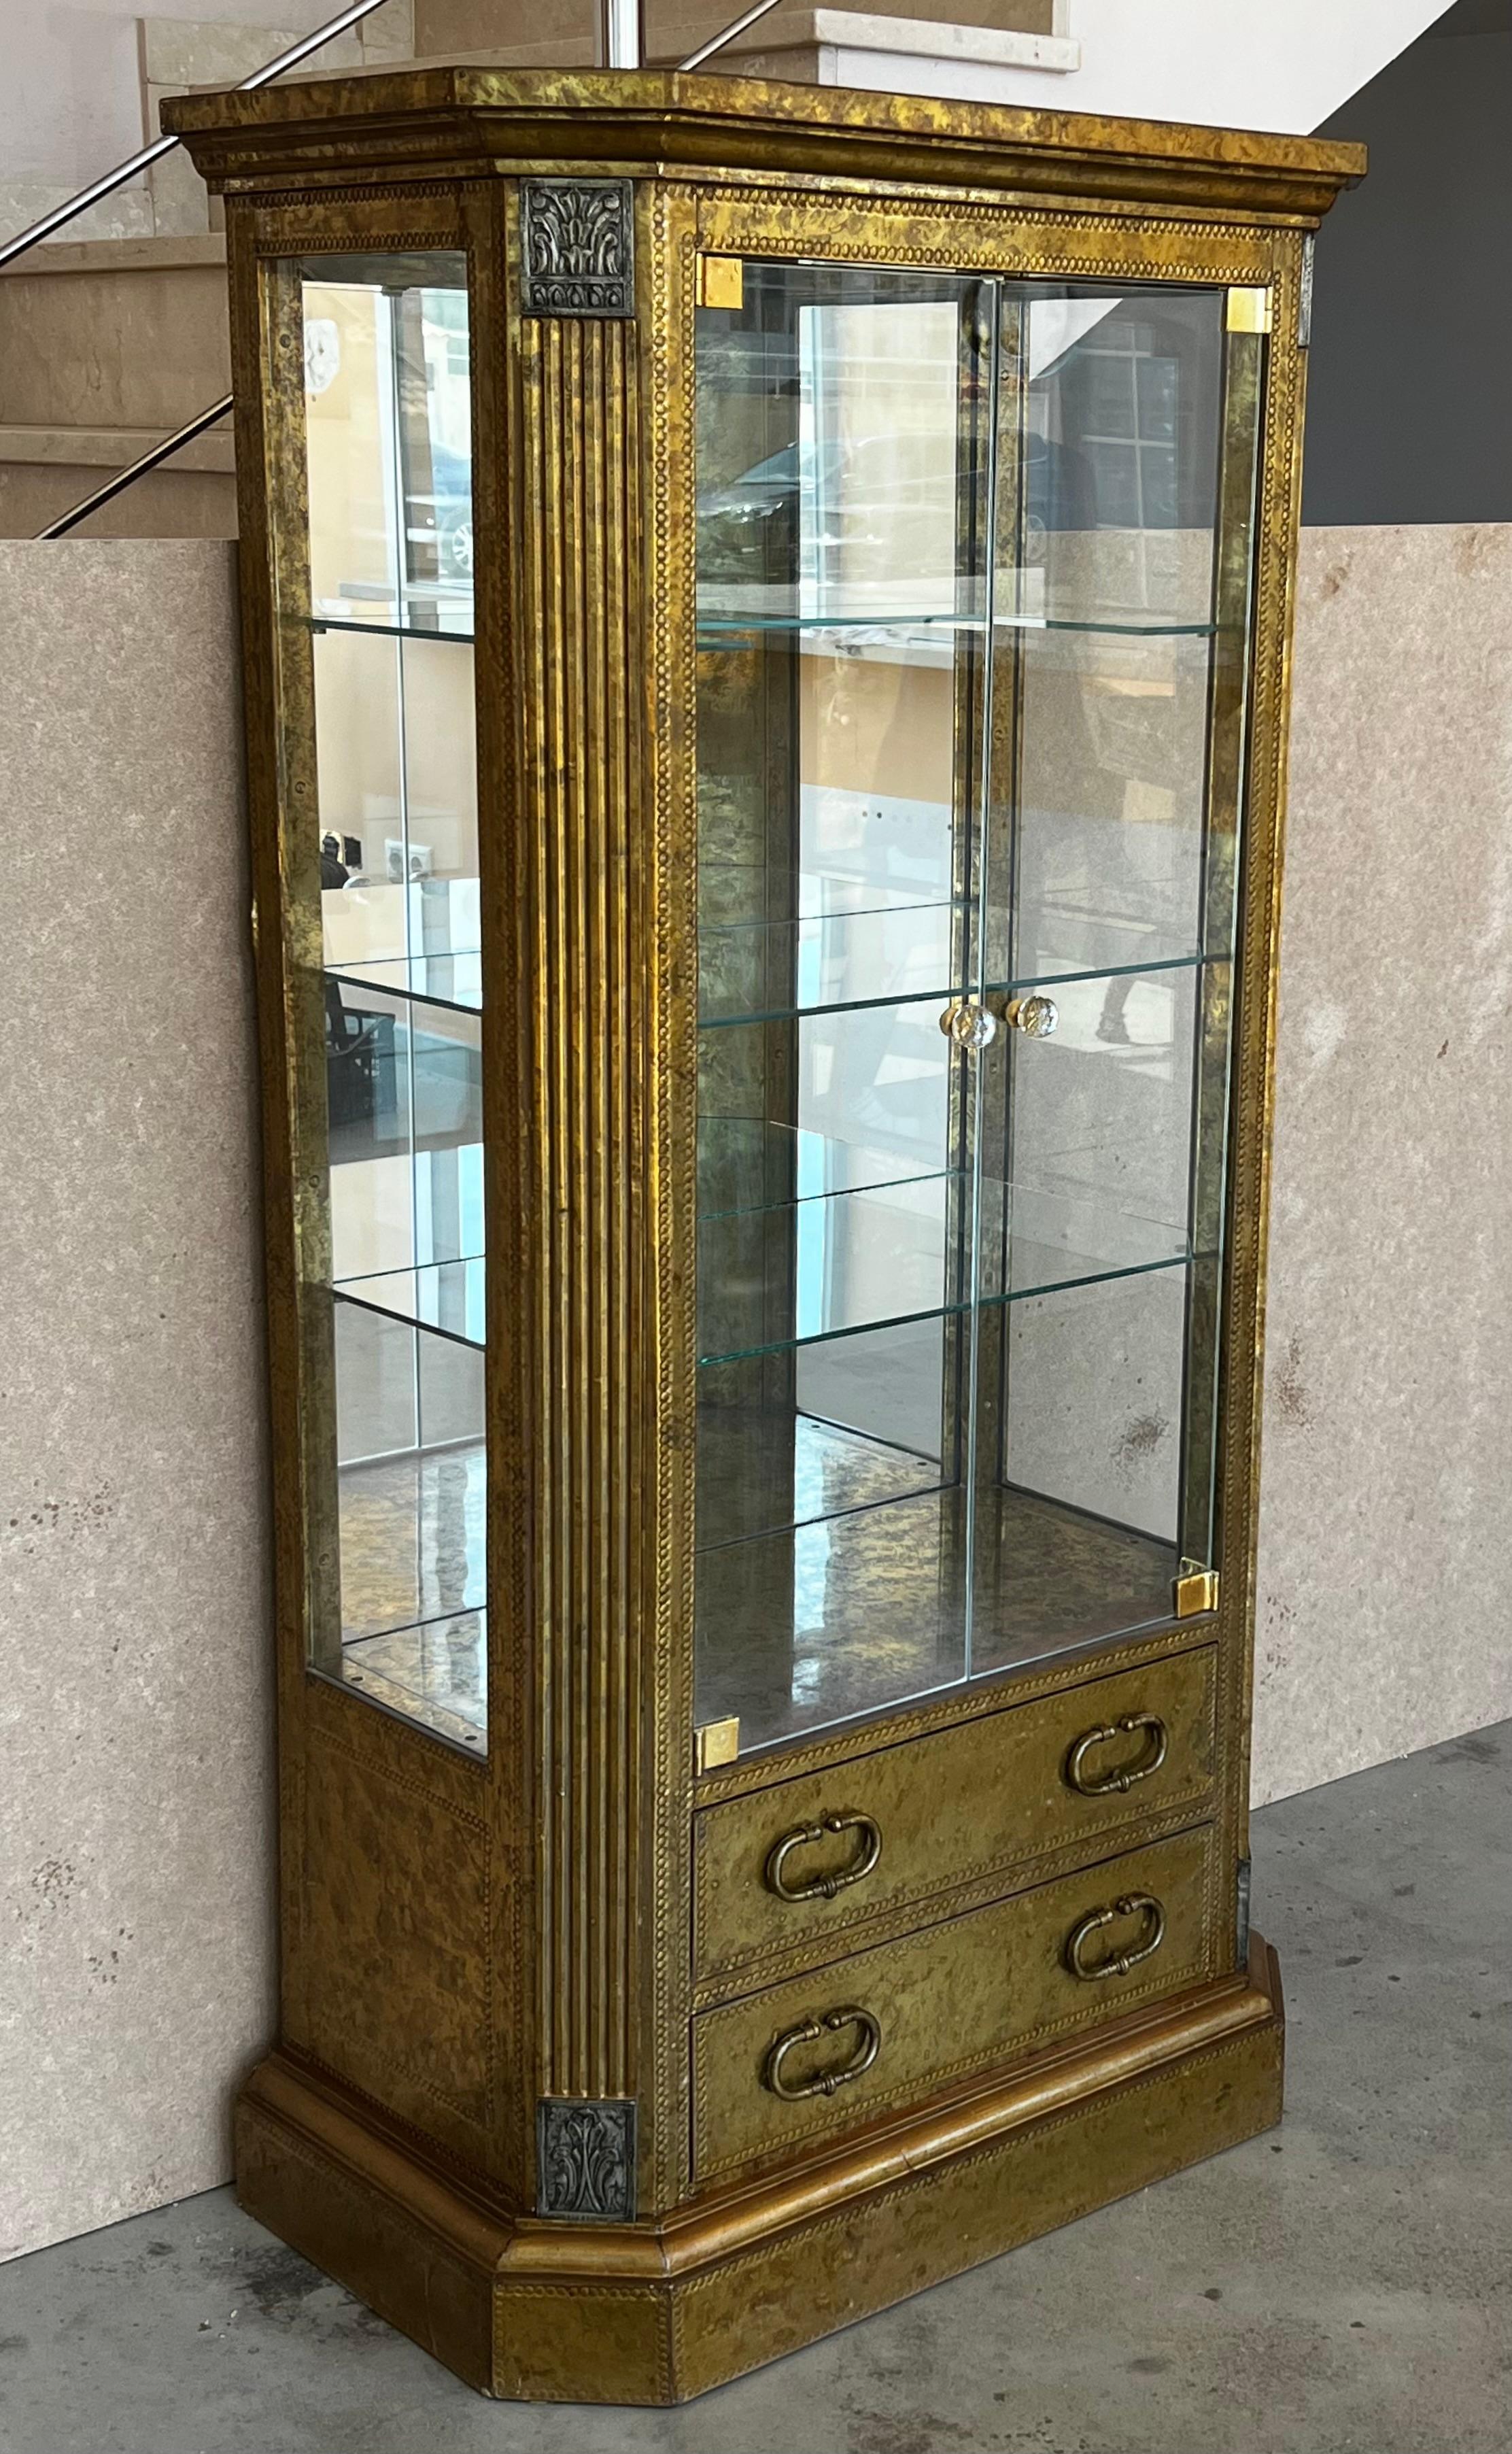 Mid-Century Modern drinks bar cabinet with nice brass faces with hammered brass nails, panels in a solid wood frame.
This piece its from the 1960s, beautiful oxidation that opens up completely.

The interior has three glass shelves and two